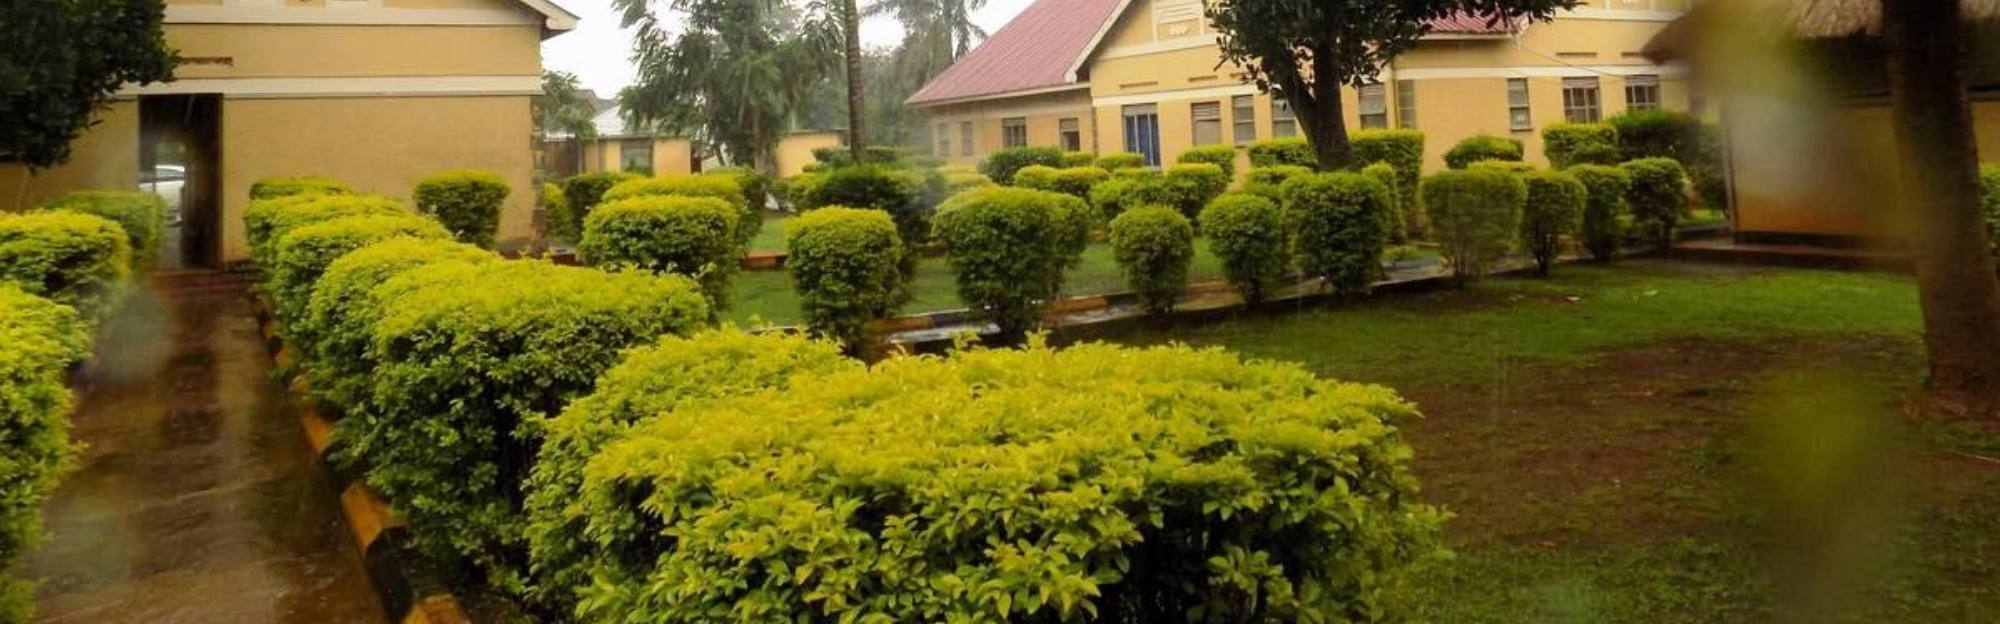 Green Garden Hotel Mbale Weddings & Conferences